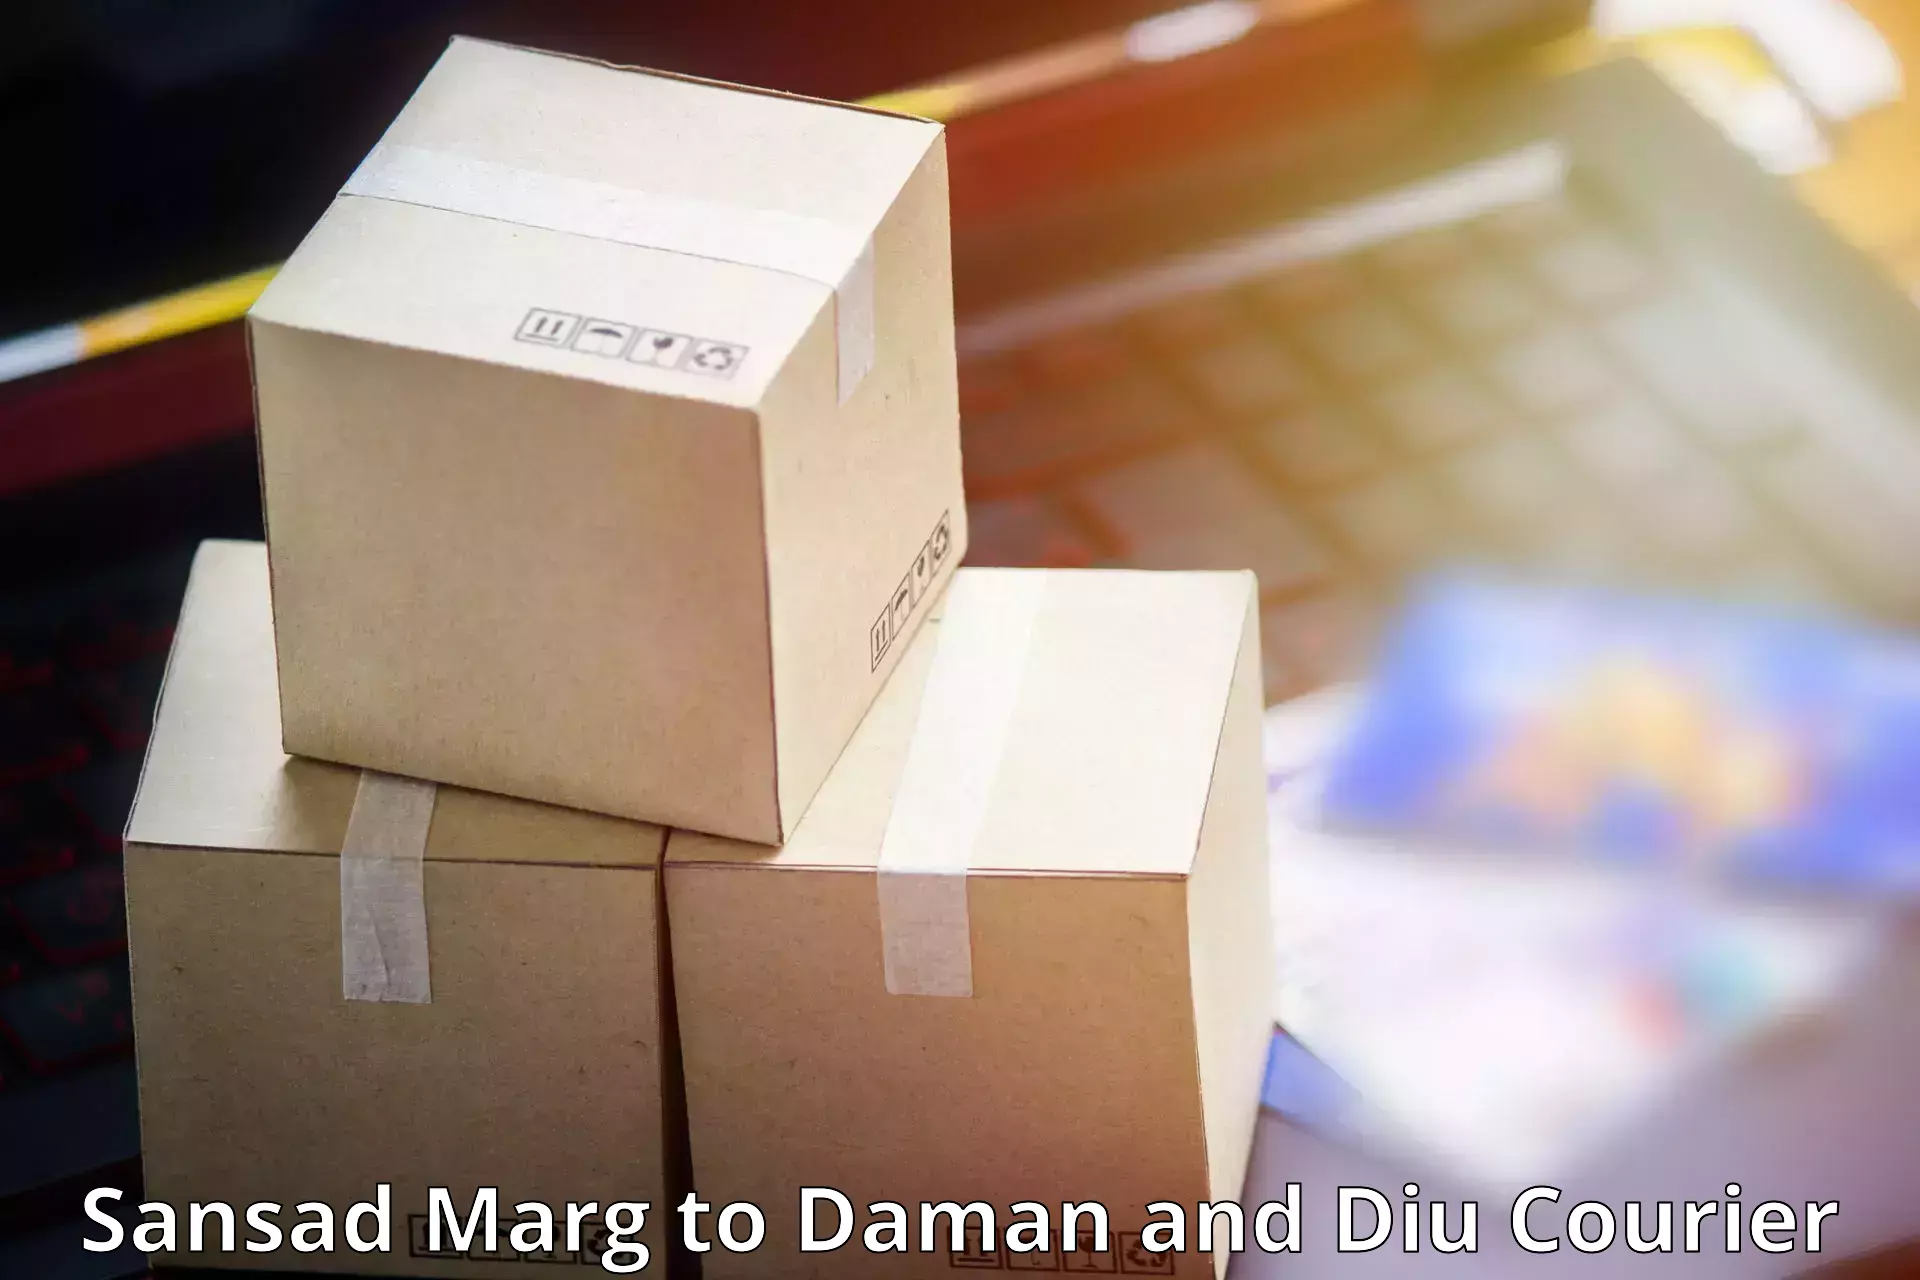 State-of-the-art courier technology Sansad Marg to Daman and Diu